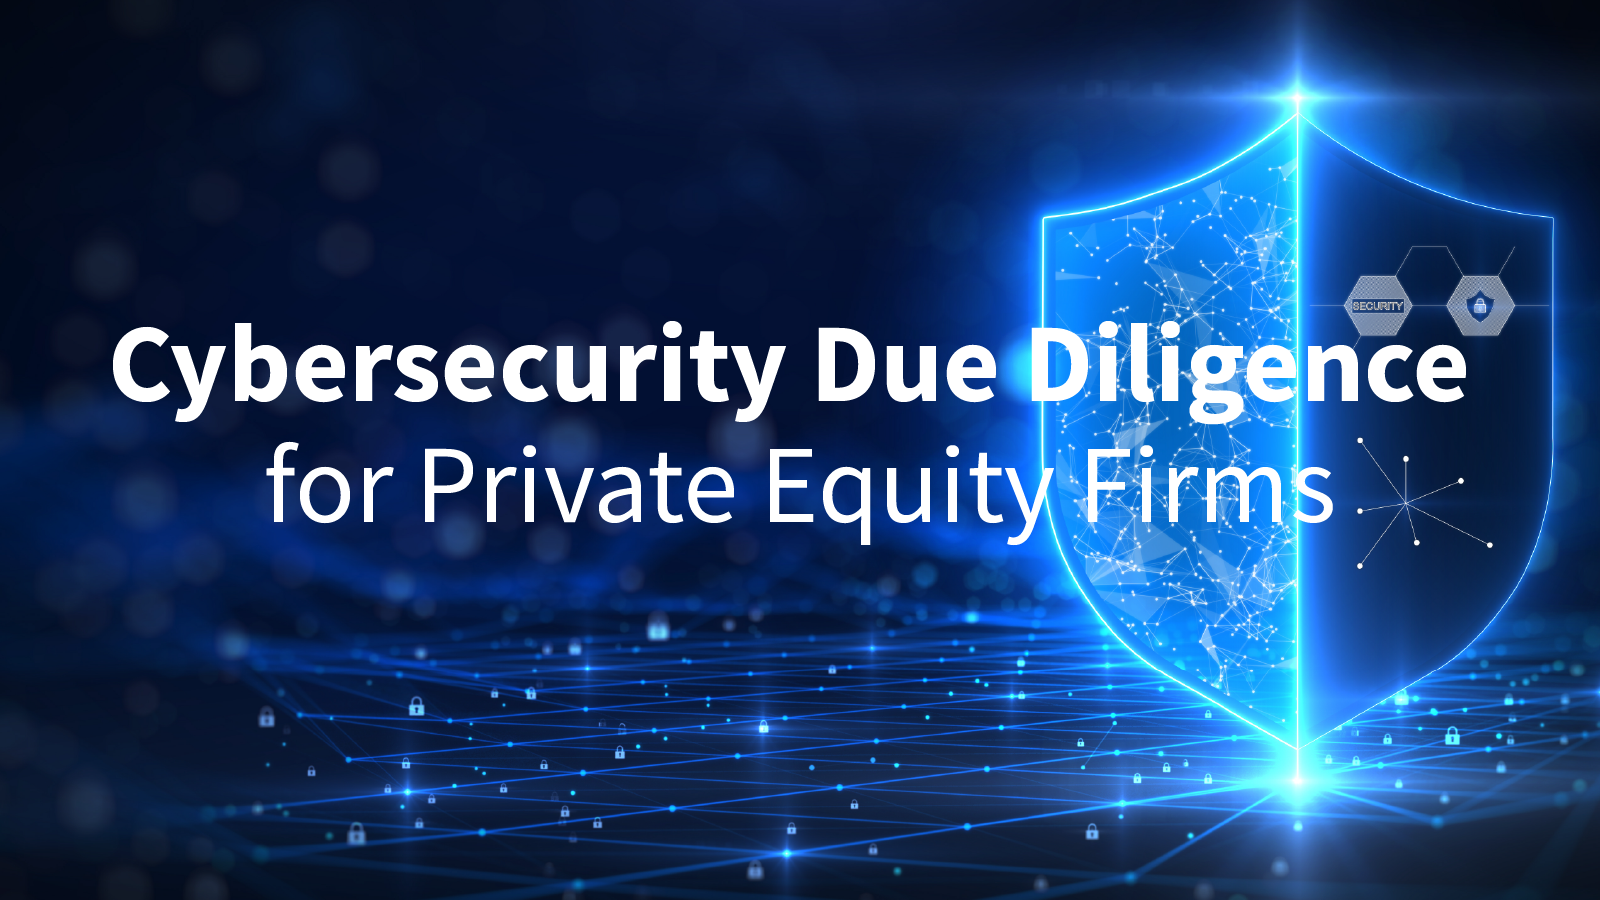 Cybersecurity Due Diligence for Private Equity Firms - AVANT